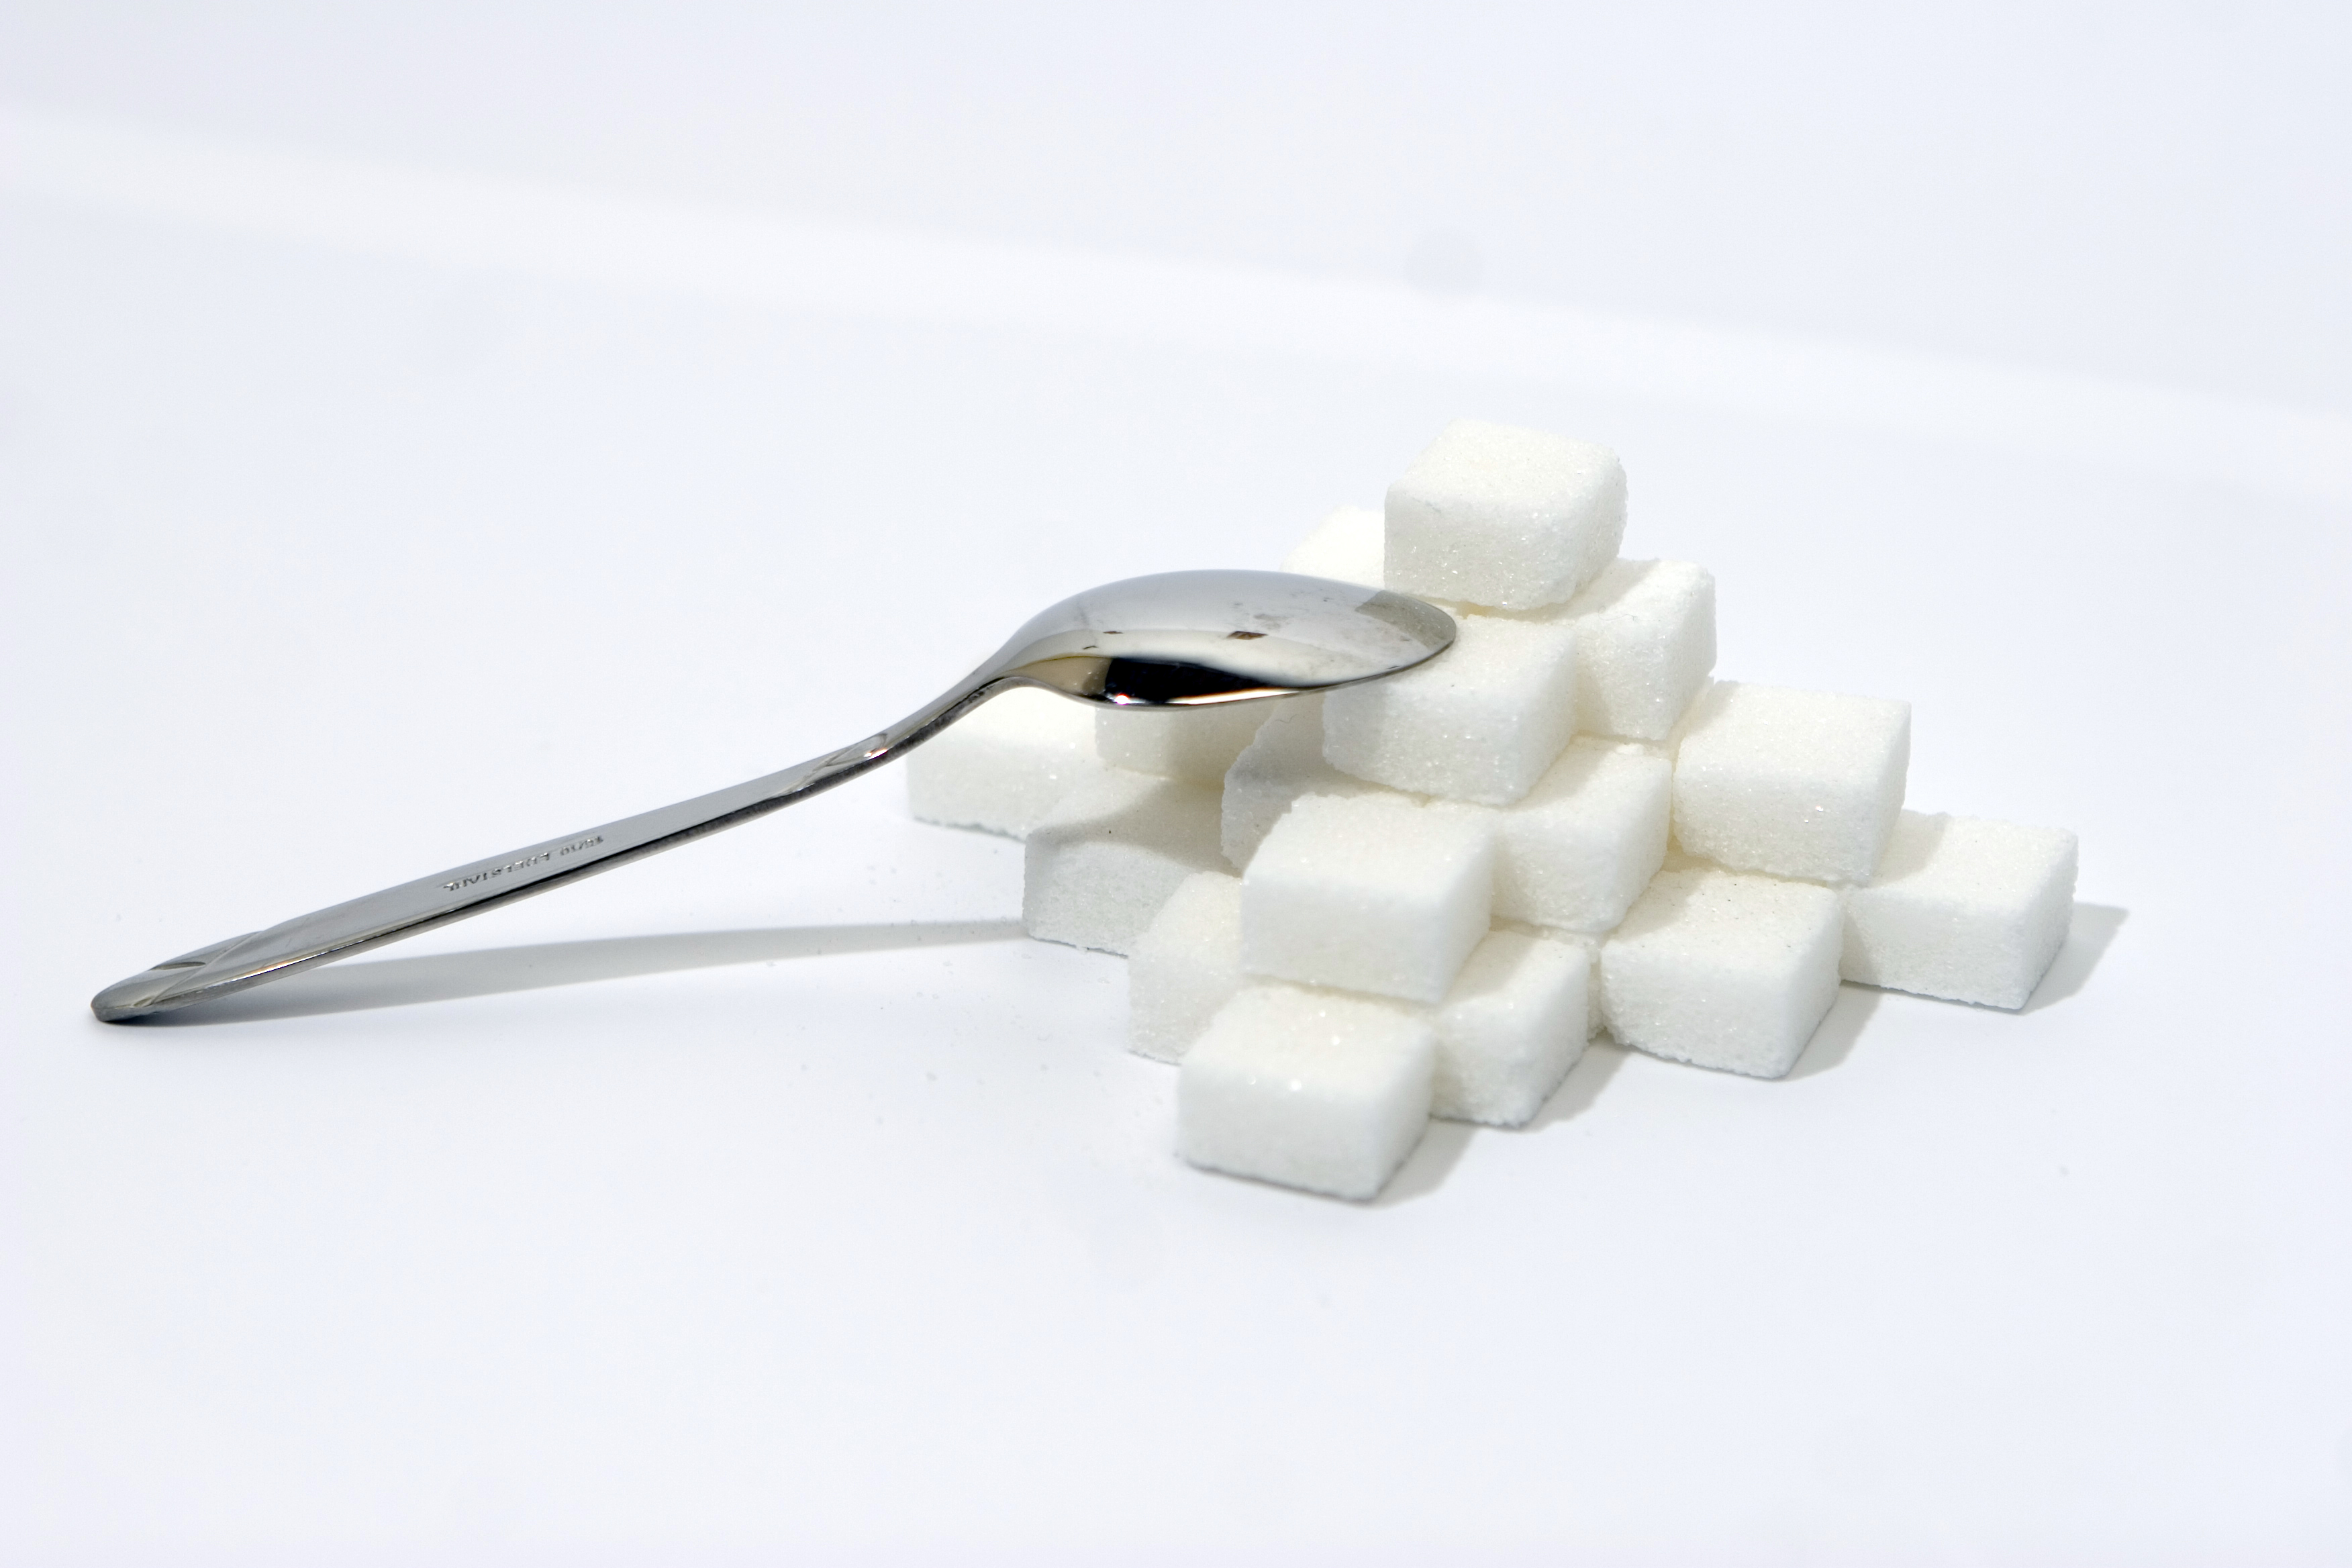 Pile of sugar cubes with spoon resting on them